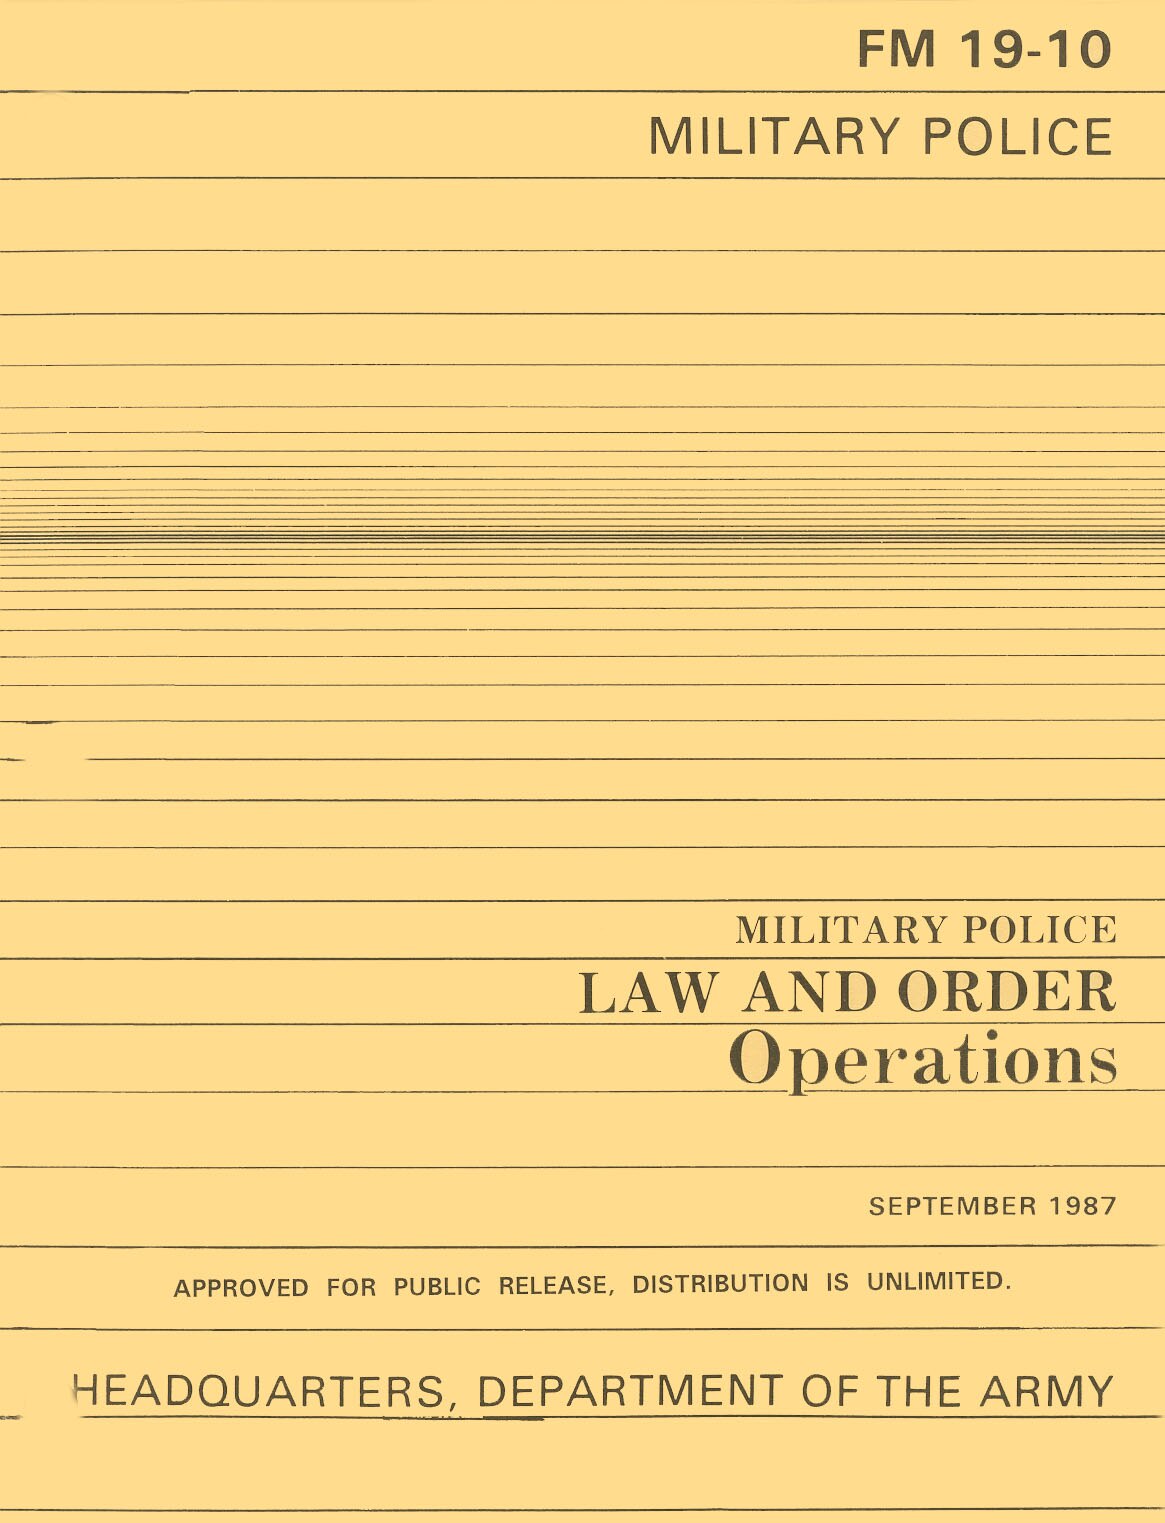 FM 19-10 Military Police Law and Order Operations